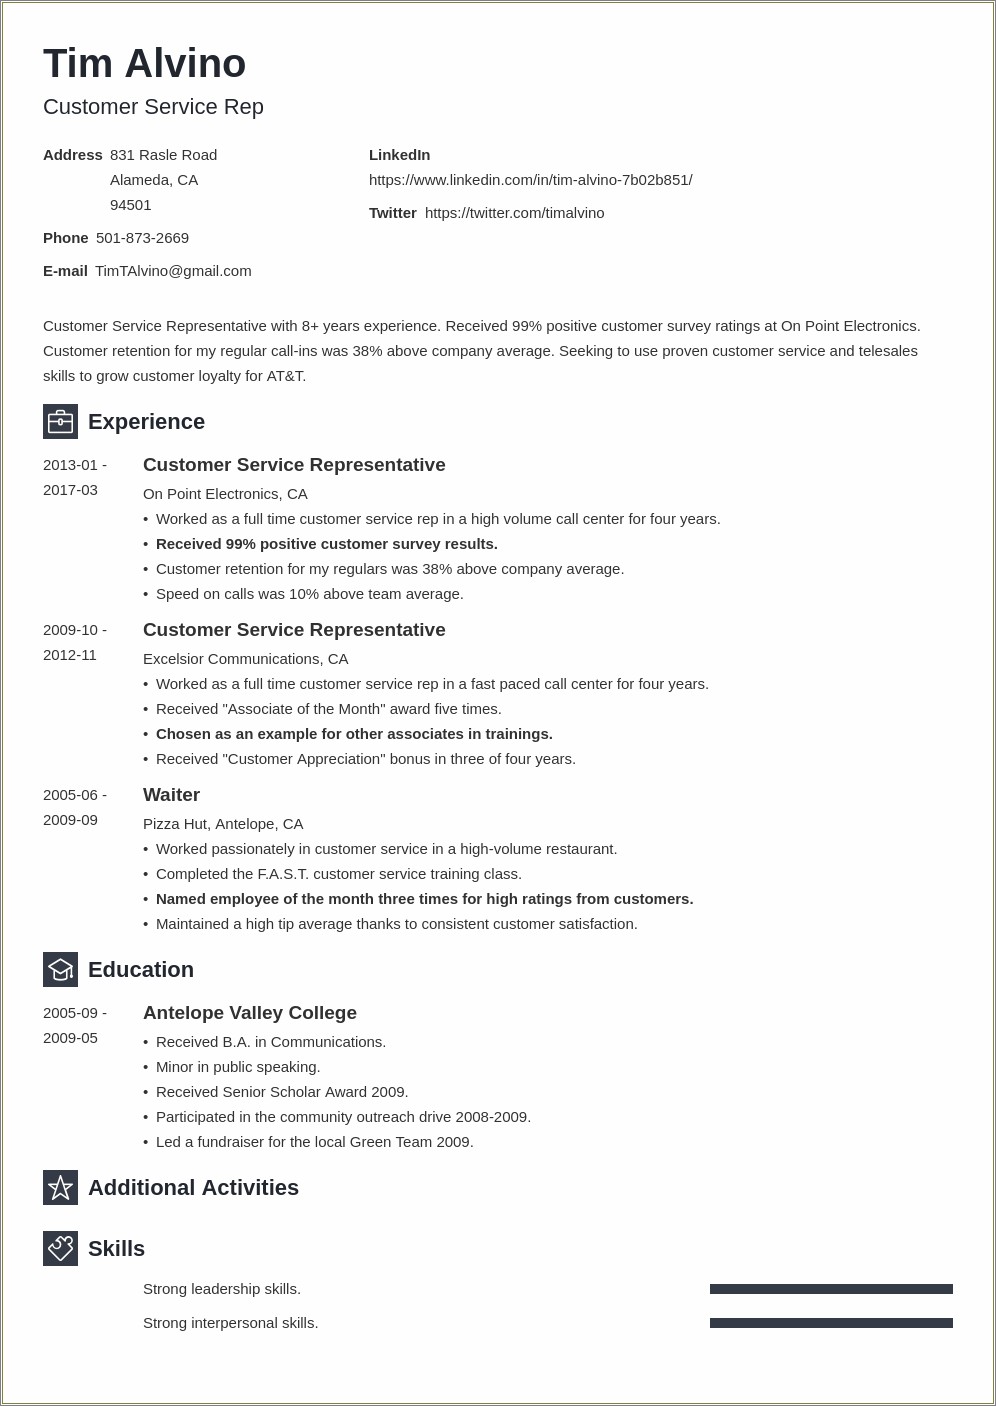 Examples Of Customer Service Experience On Resumes